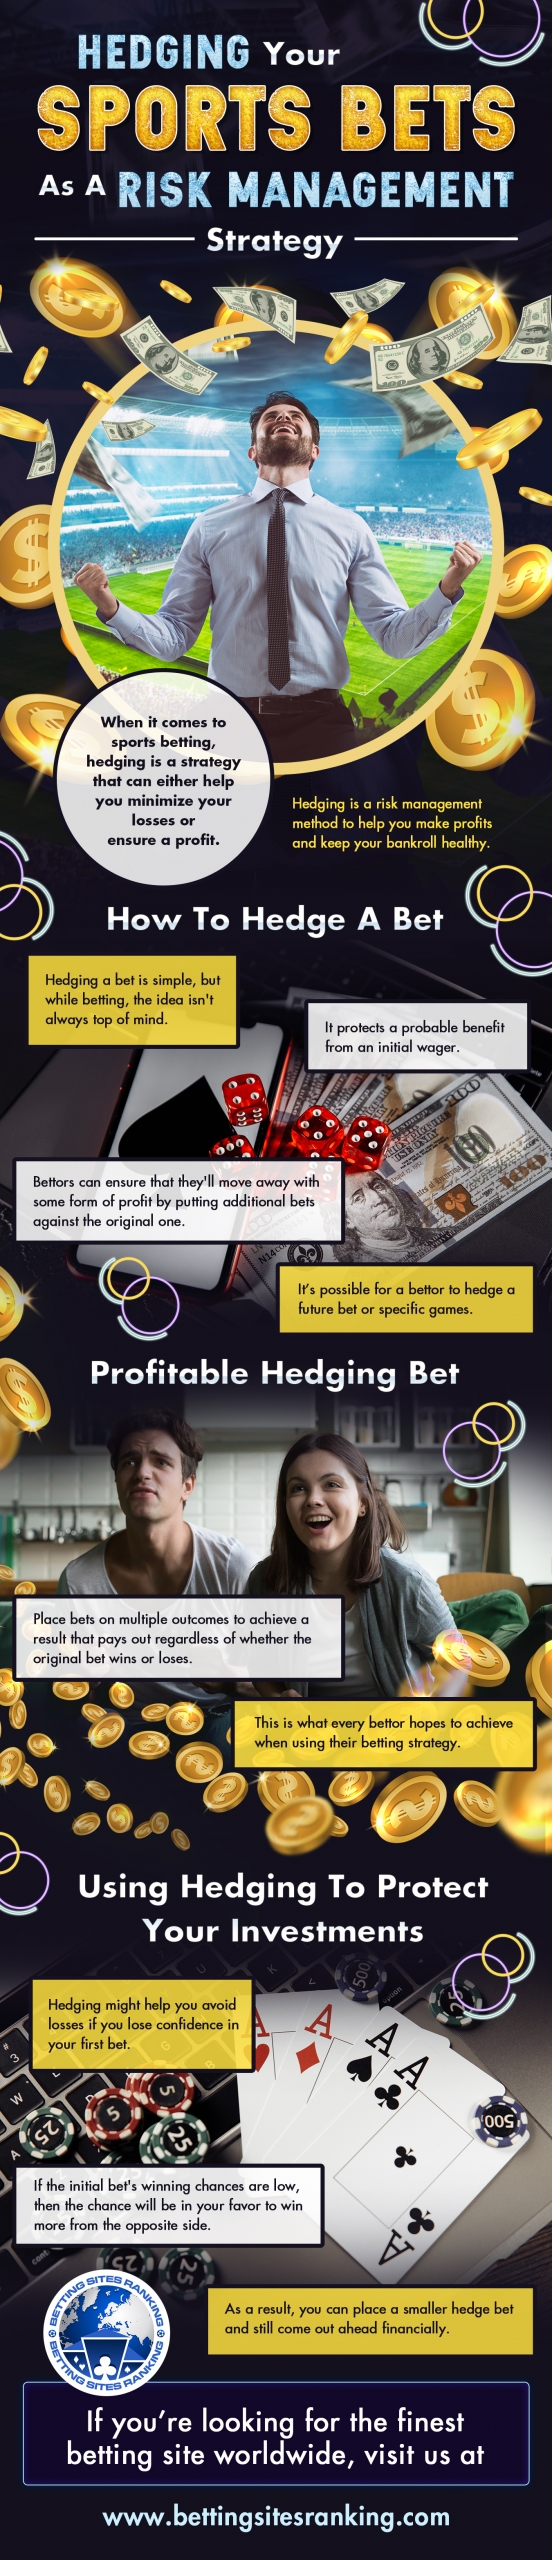 Hedging-Your-Sports-Bets-As-A-Risk-Management-Strategy